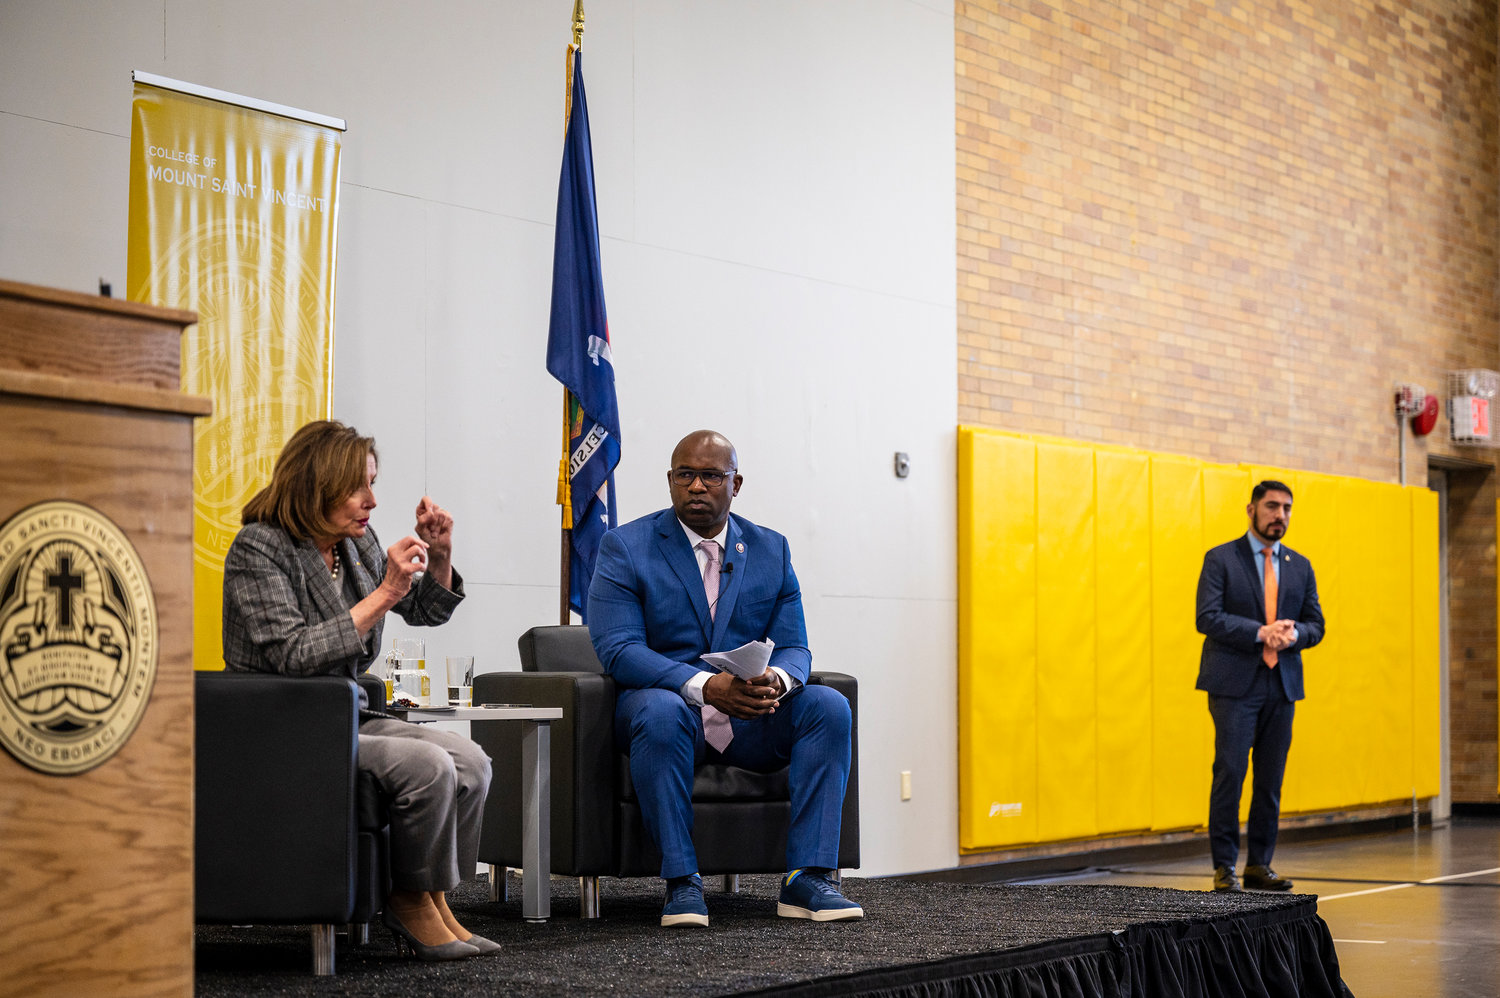 U.S. Rep. Jamaal Bowman and House Speaker Nancy Pelosi got together for a town hall meeting this past Monday at the College of Mount Saint Vincent. Donning a Ukrainian-flag lapel pin, Pelosi.